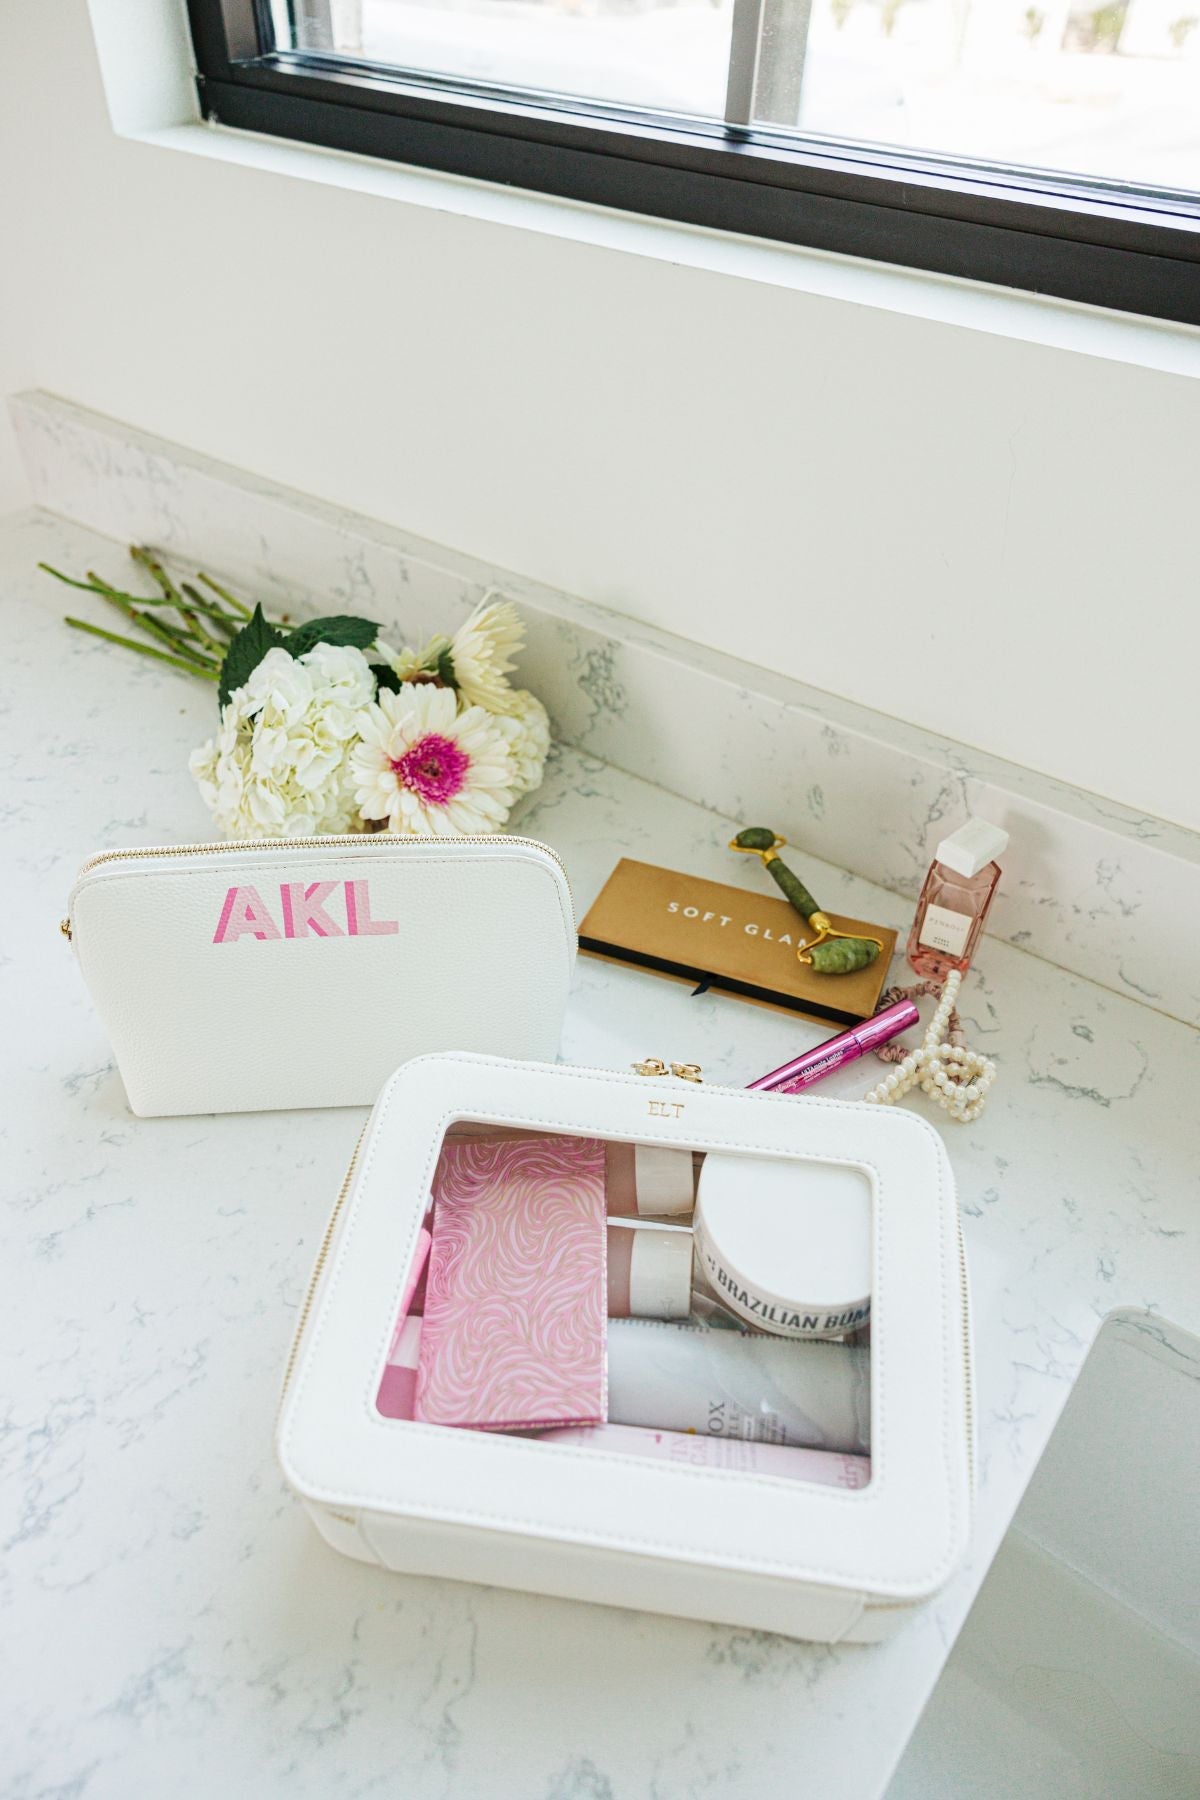 A group of white, tan, and black train cases are personalized with gold foil monograms.